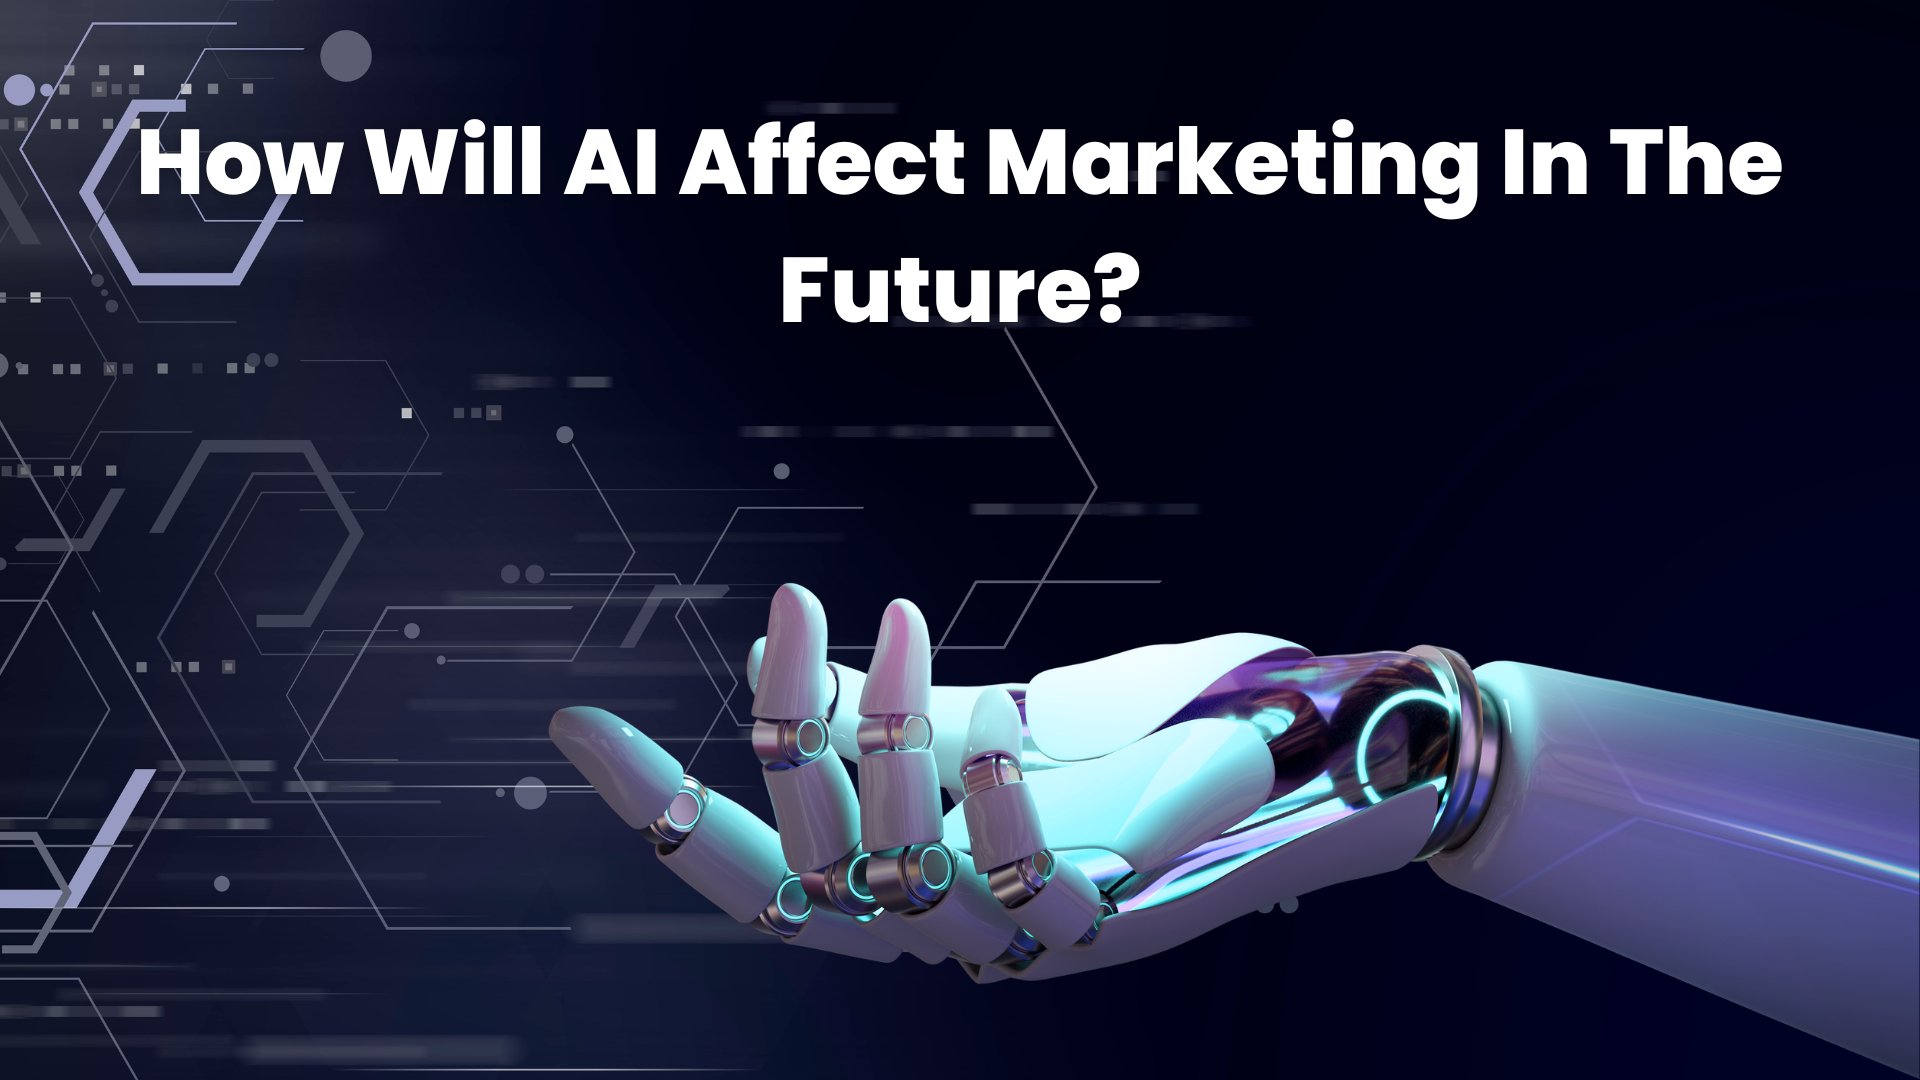 How will AI affect marketing in the future?